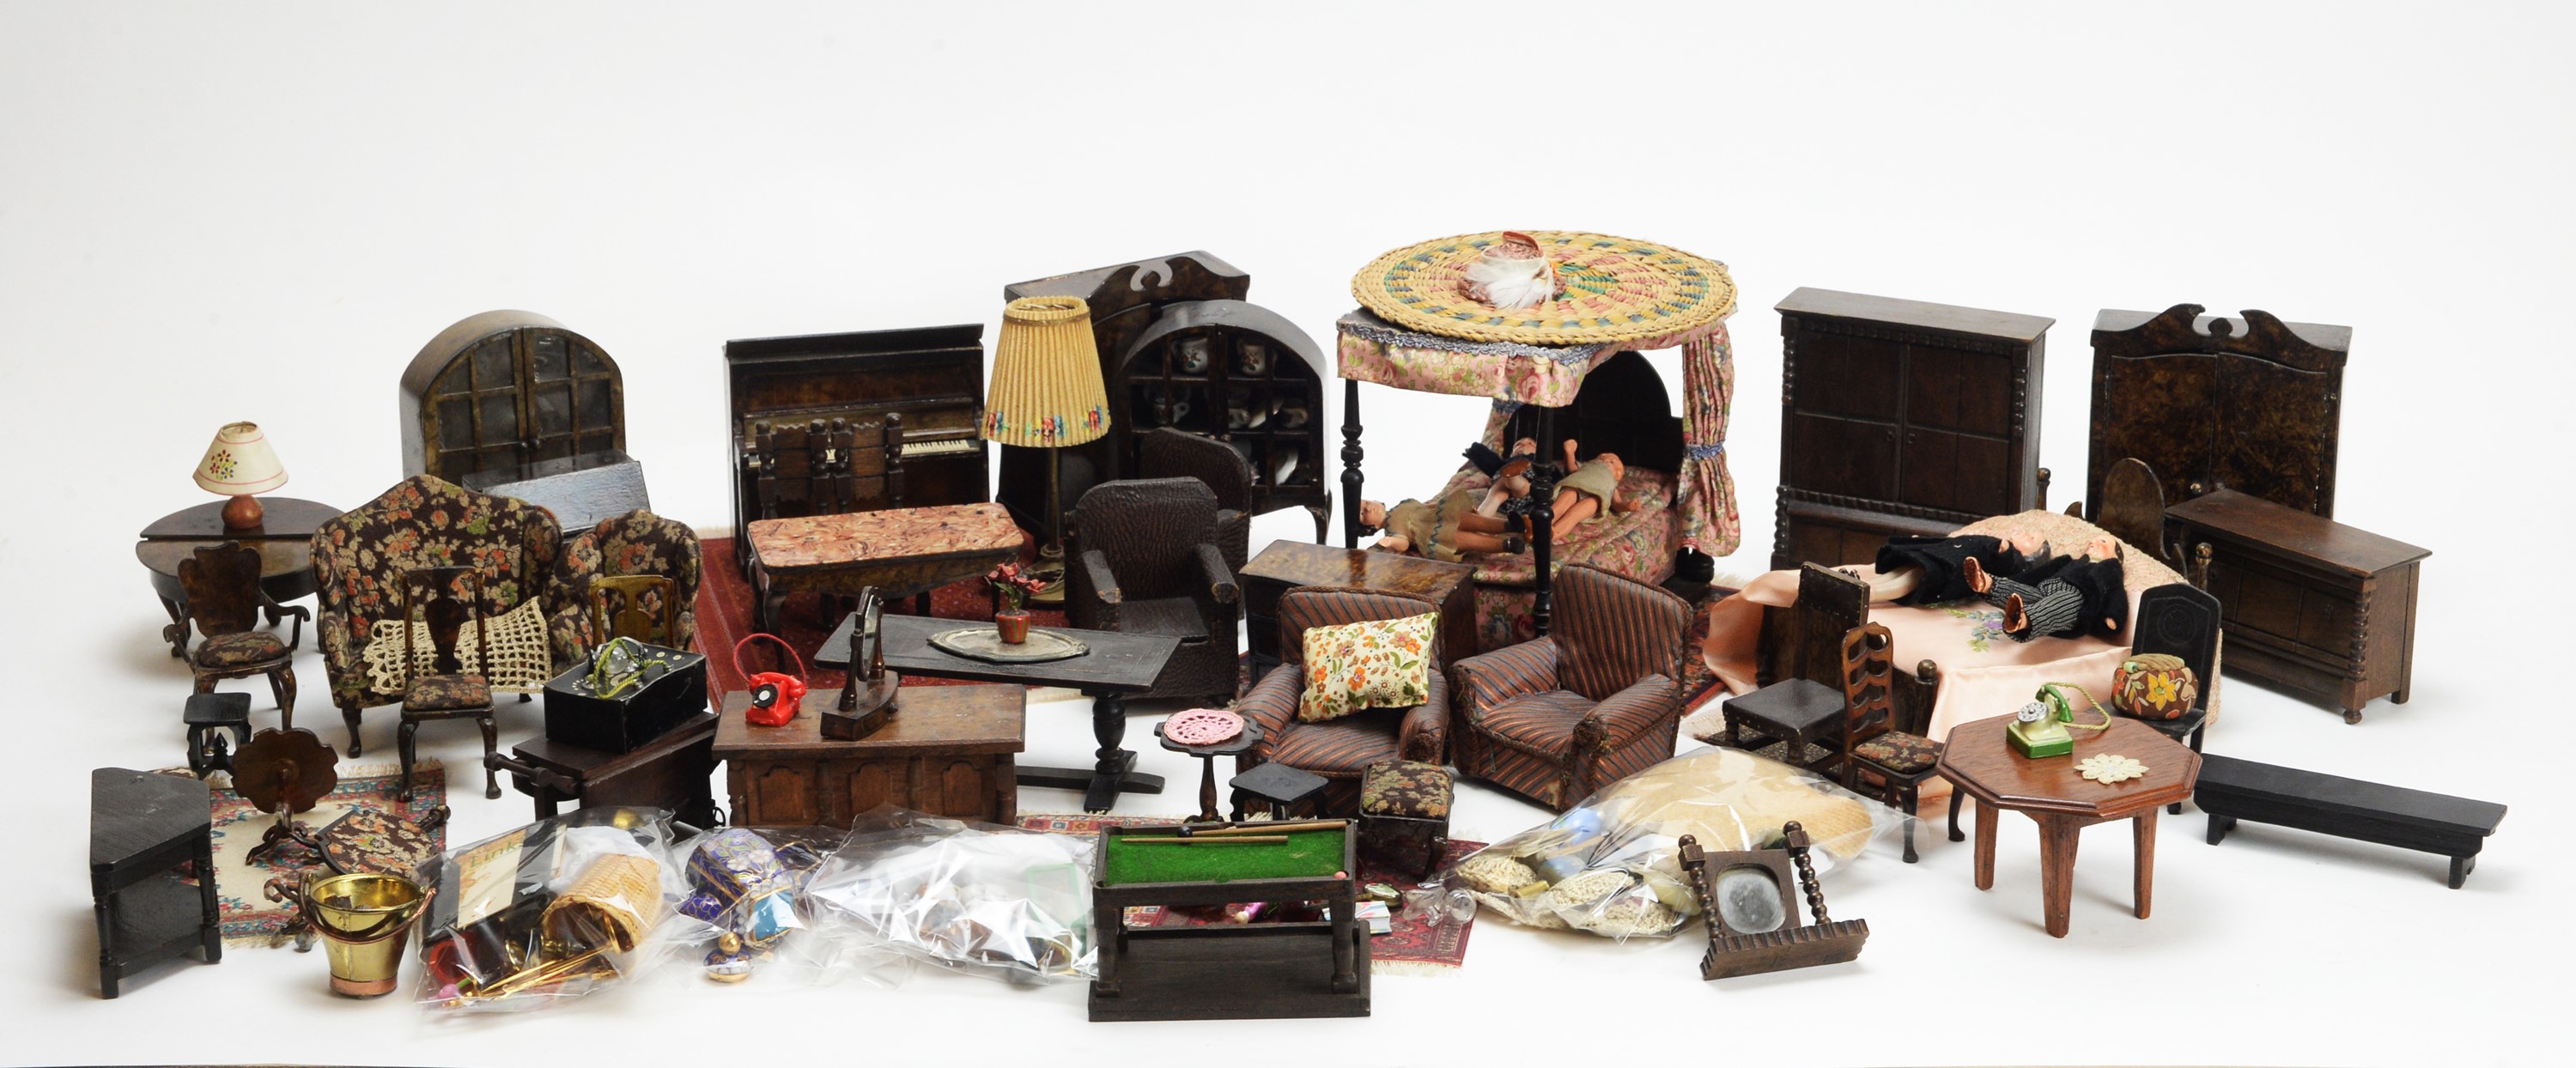 A collection of vintage and antique miniature dolls, furniture and other items. - Image 2 of 2